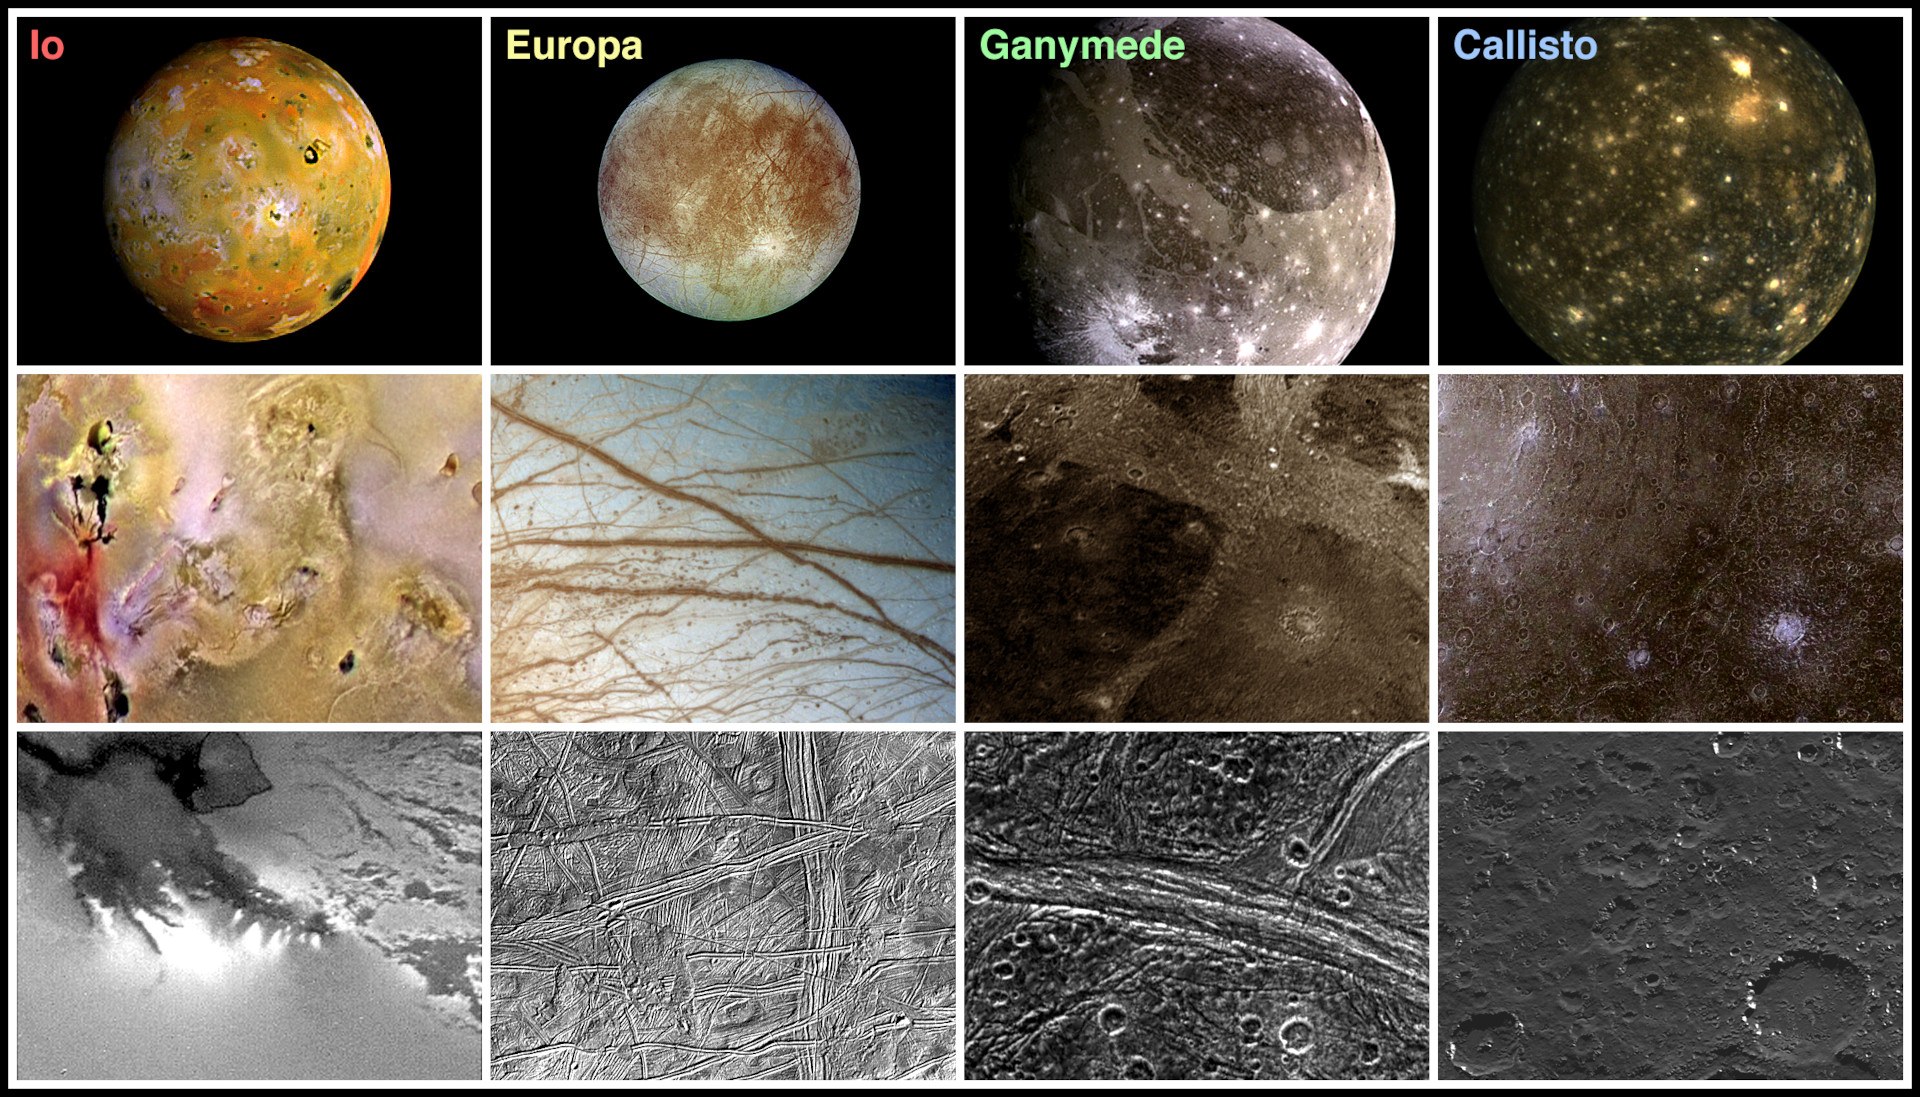 Different moon surfaces